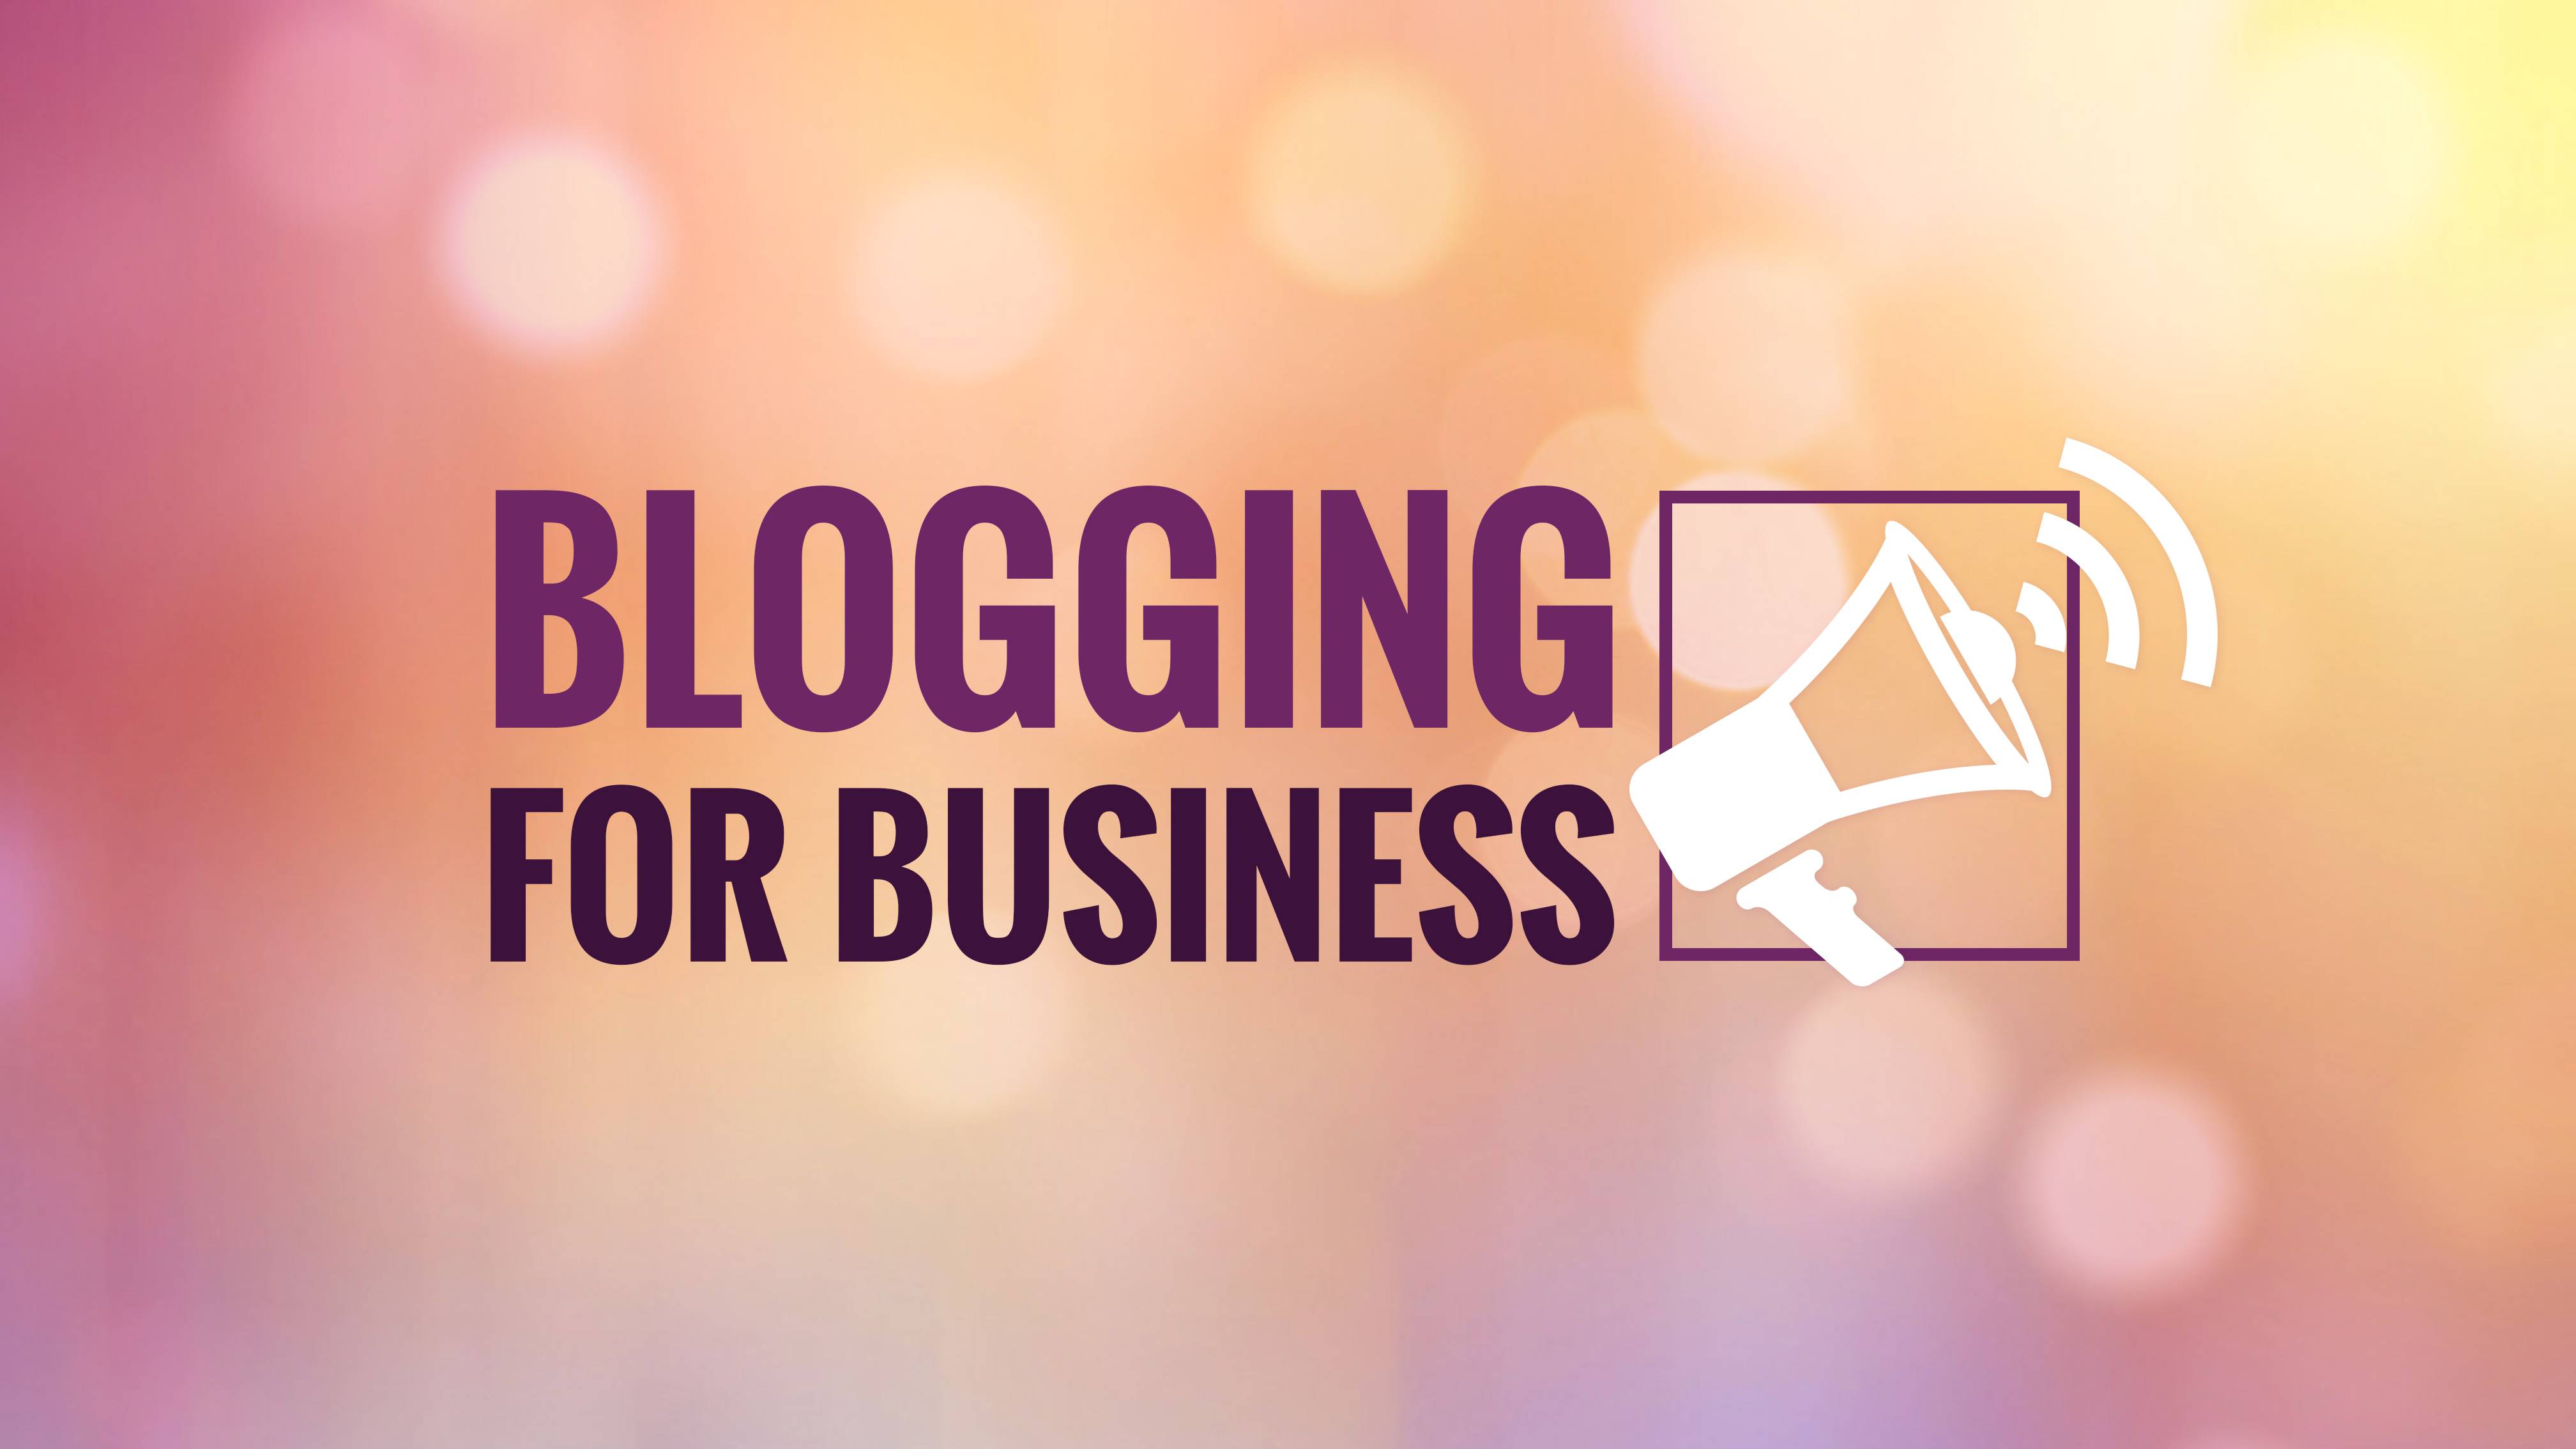 blogging-for-business-seo-is-more-than-just-keywords